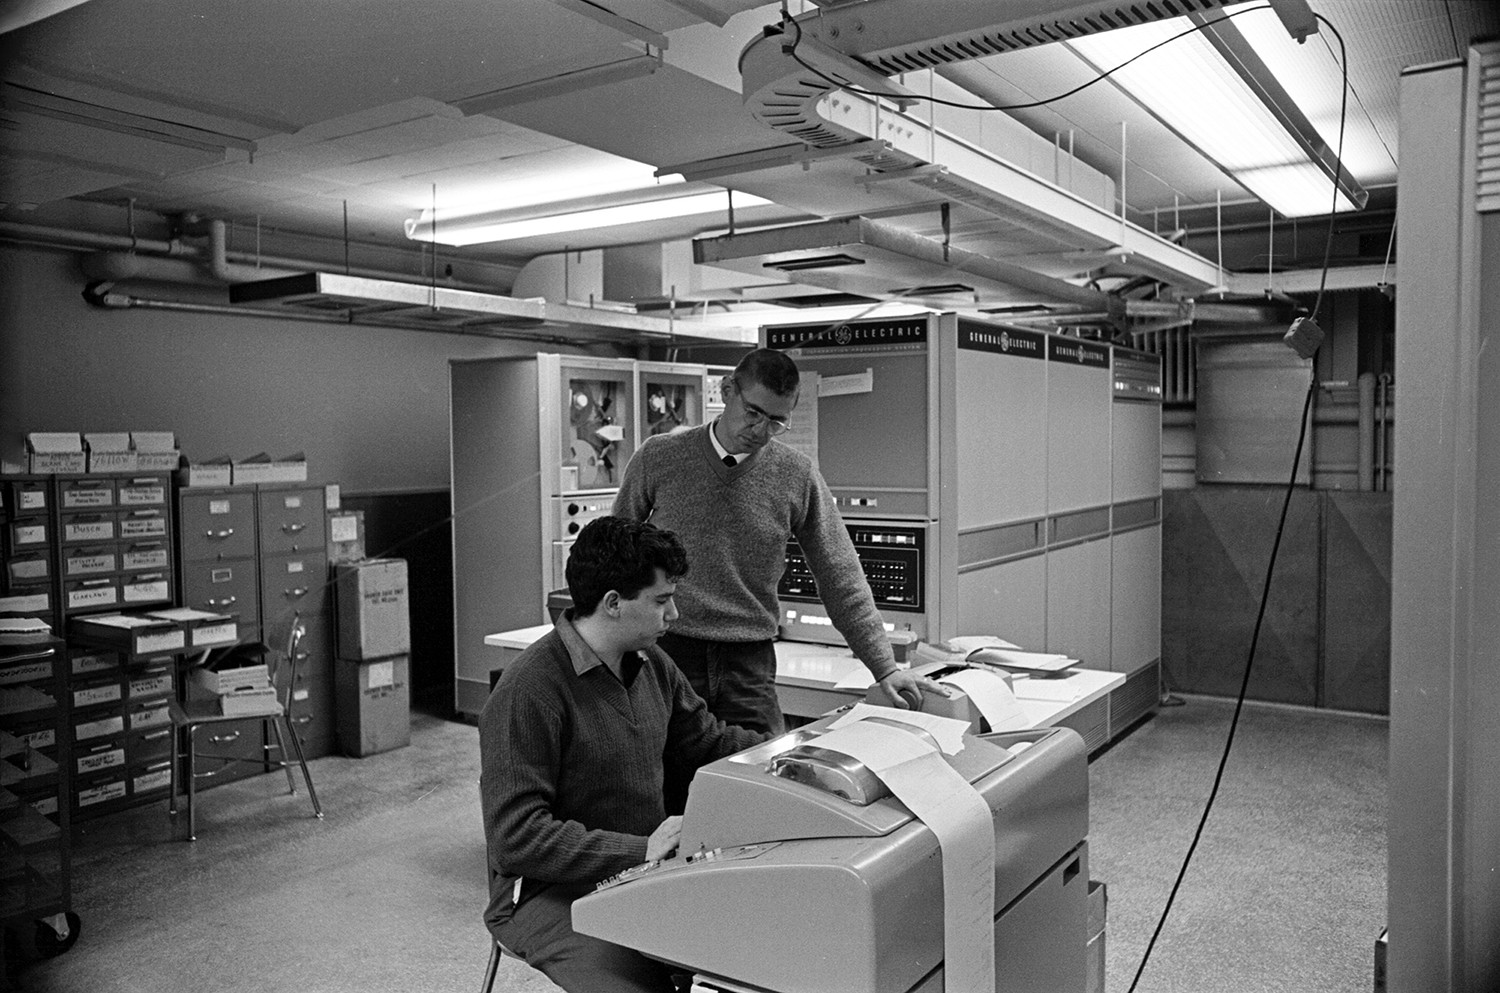 Tom Kurtz (standing) works with Michael Busch, co-programmer of the DTSS, with the GE-225 mainframe in the background (Adrian N. Bouchard / Dartmouth College)